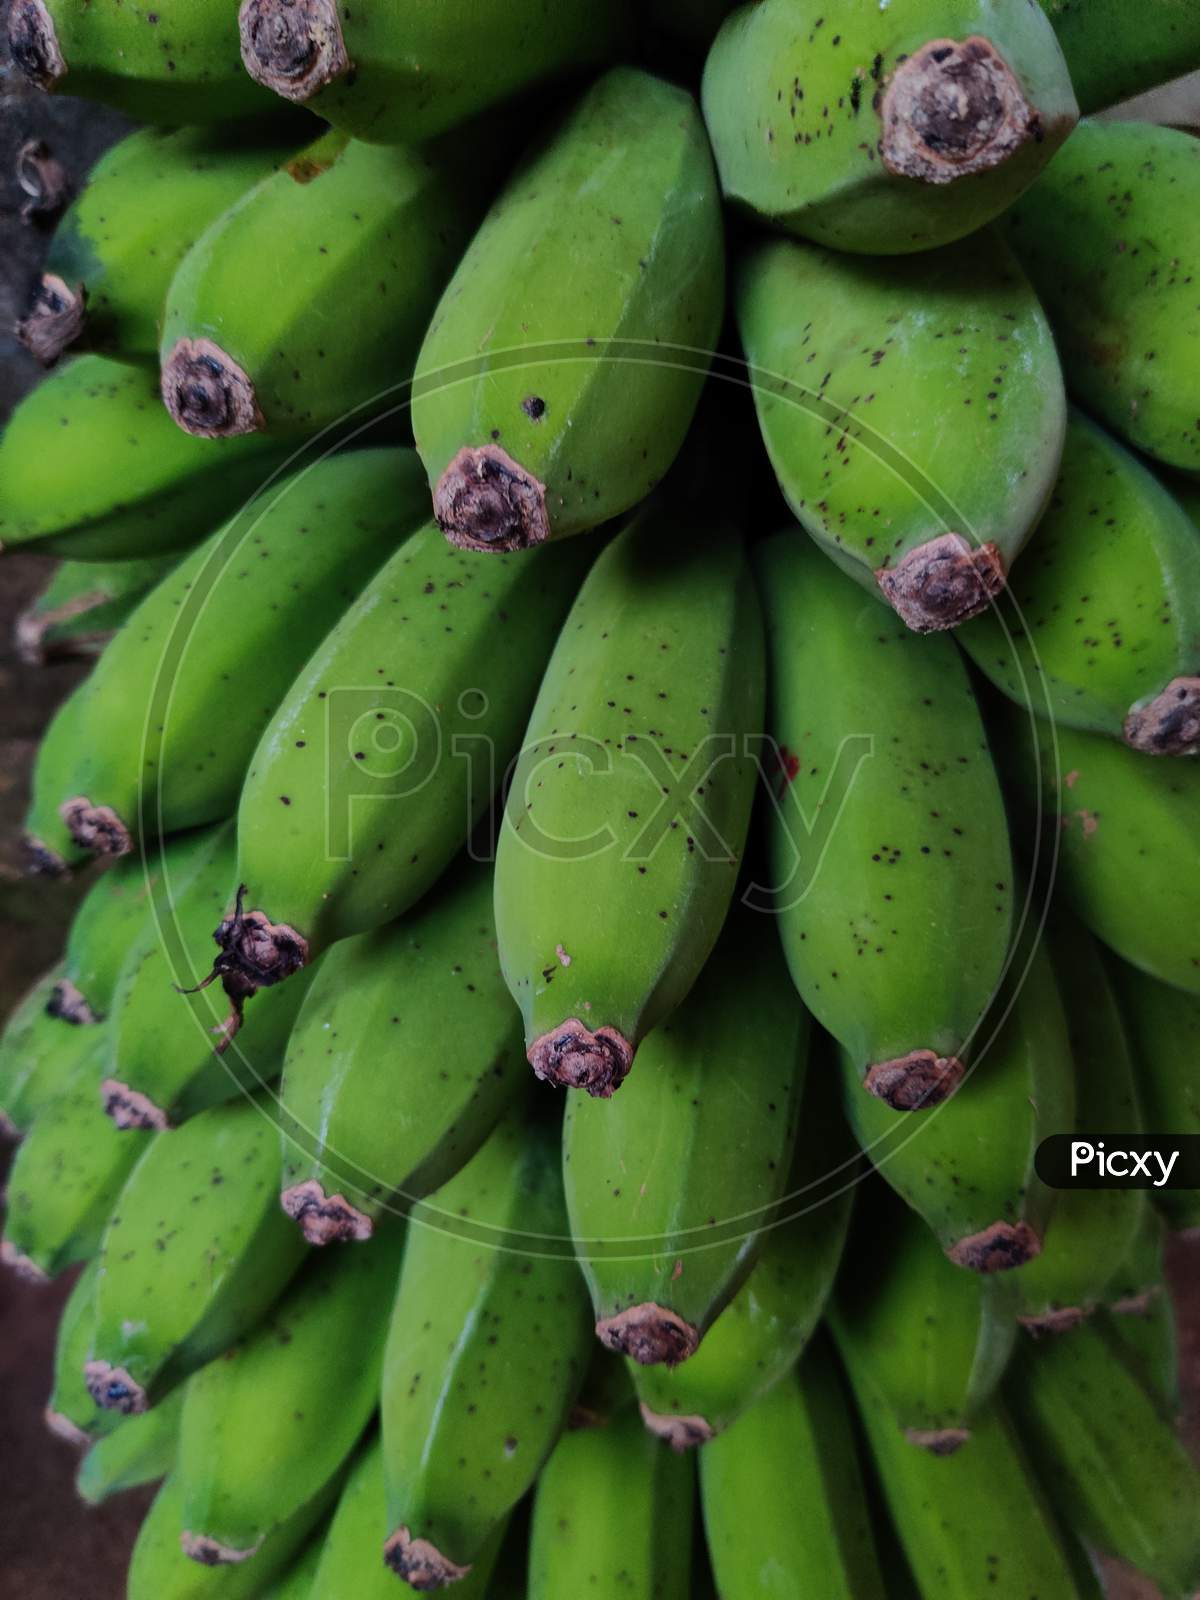 Fresh banana plant with fruit. Banana is the healthiest fruit for digestion.